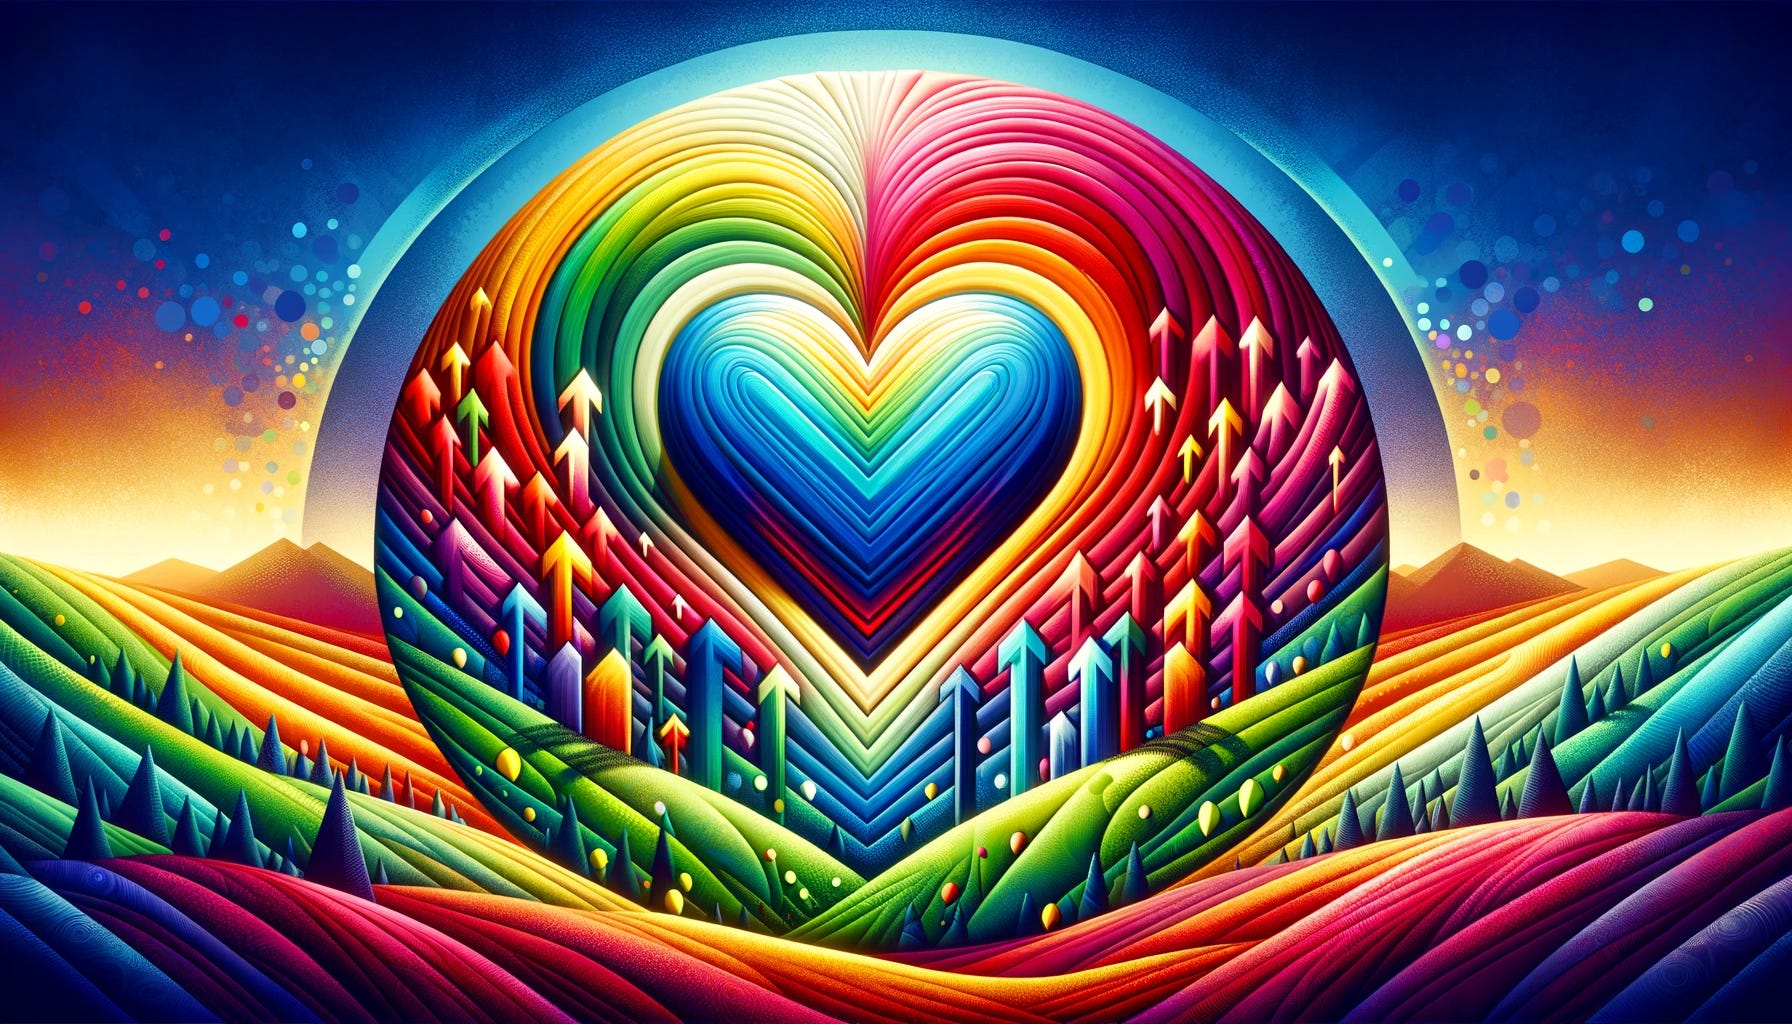 A vibrant, colorful landscape-oriented image symbolizing 'an invitation to grow'. At the center is a stylized heart shape, filled with bright, eye-catching colors. Surrounding this colorful heart, within the confines of a circle, are several arrows pointing outward towards the circle's edge. These arrows are also colorful, each one potentially a different hue, representing diversity and dynamic growth. The background contrasts with the central symbols, perhaps in softer colors, to highlight the heart and arrows. The overall design is modern, lively, and visually stimulating, emphasizing the theme of growth and expansion.